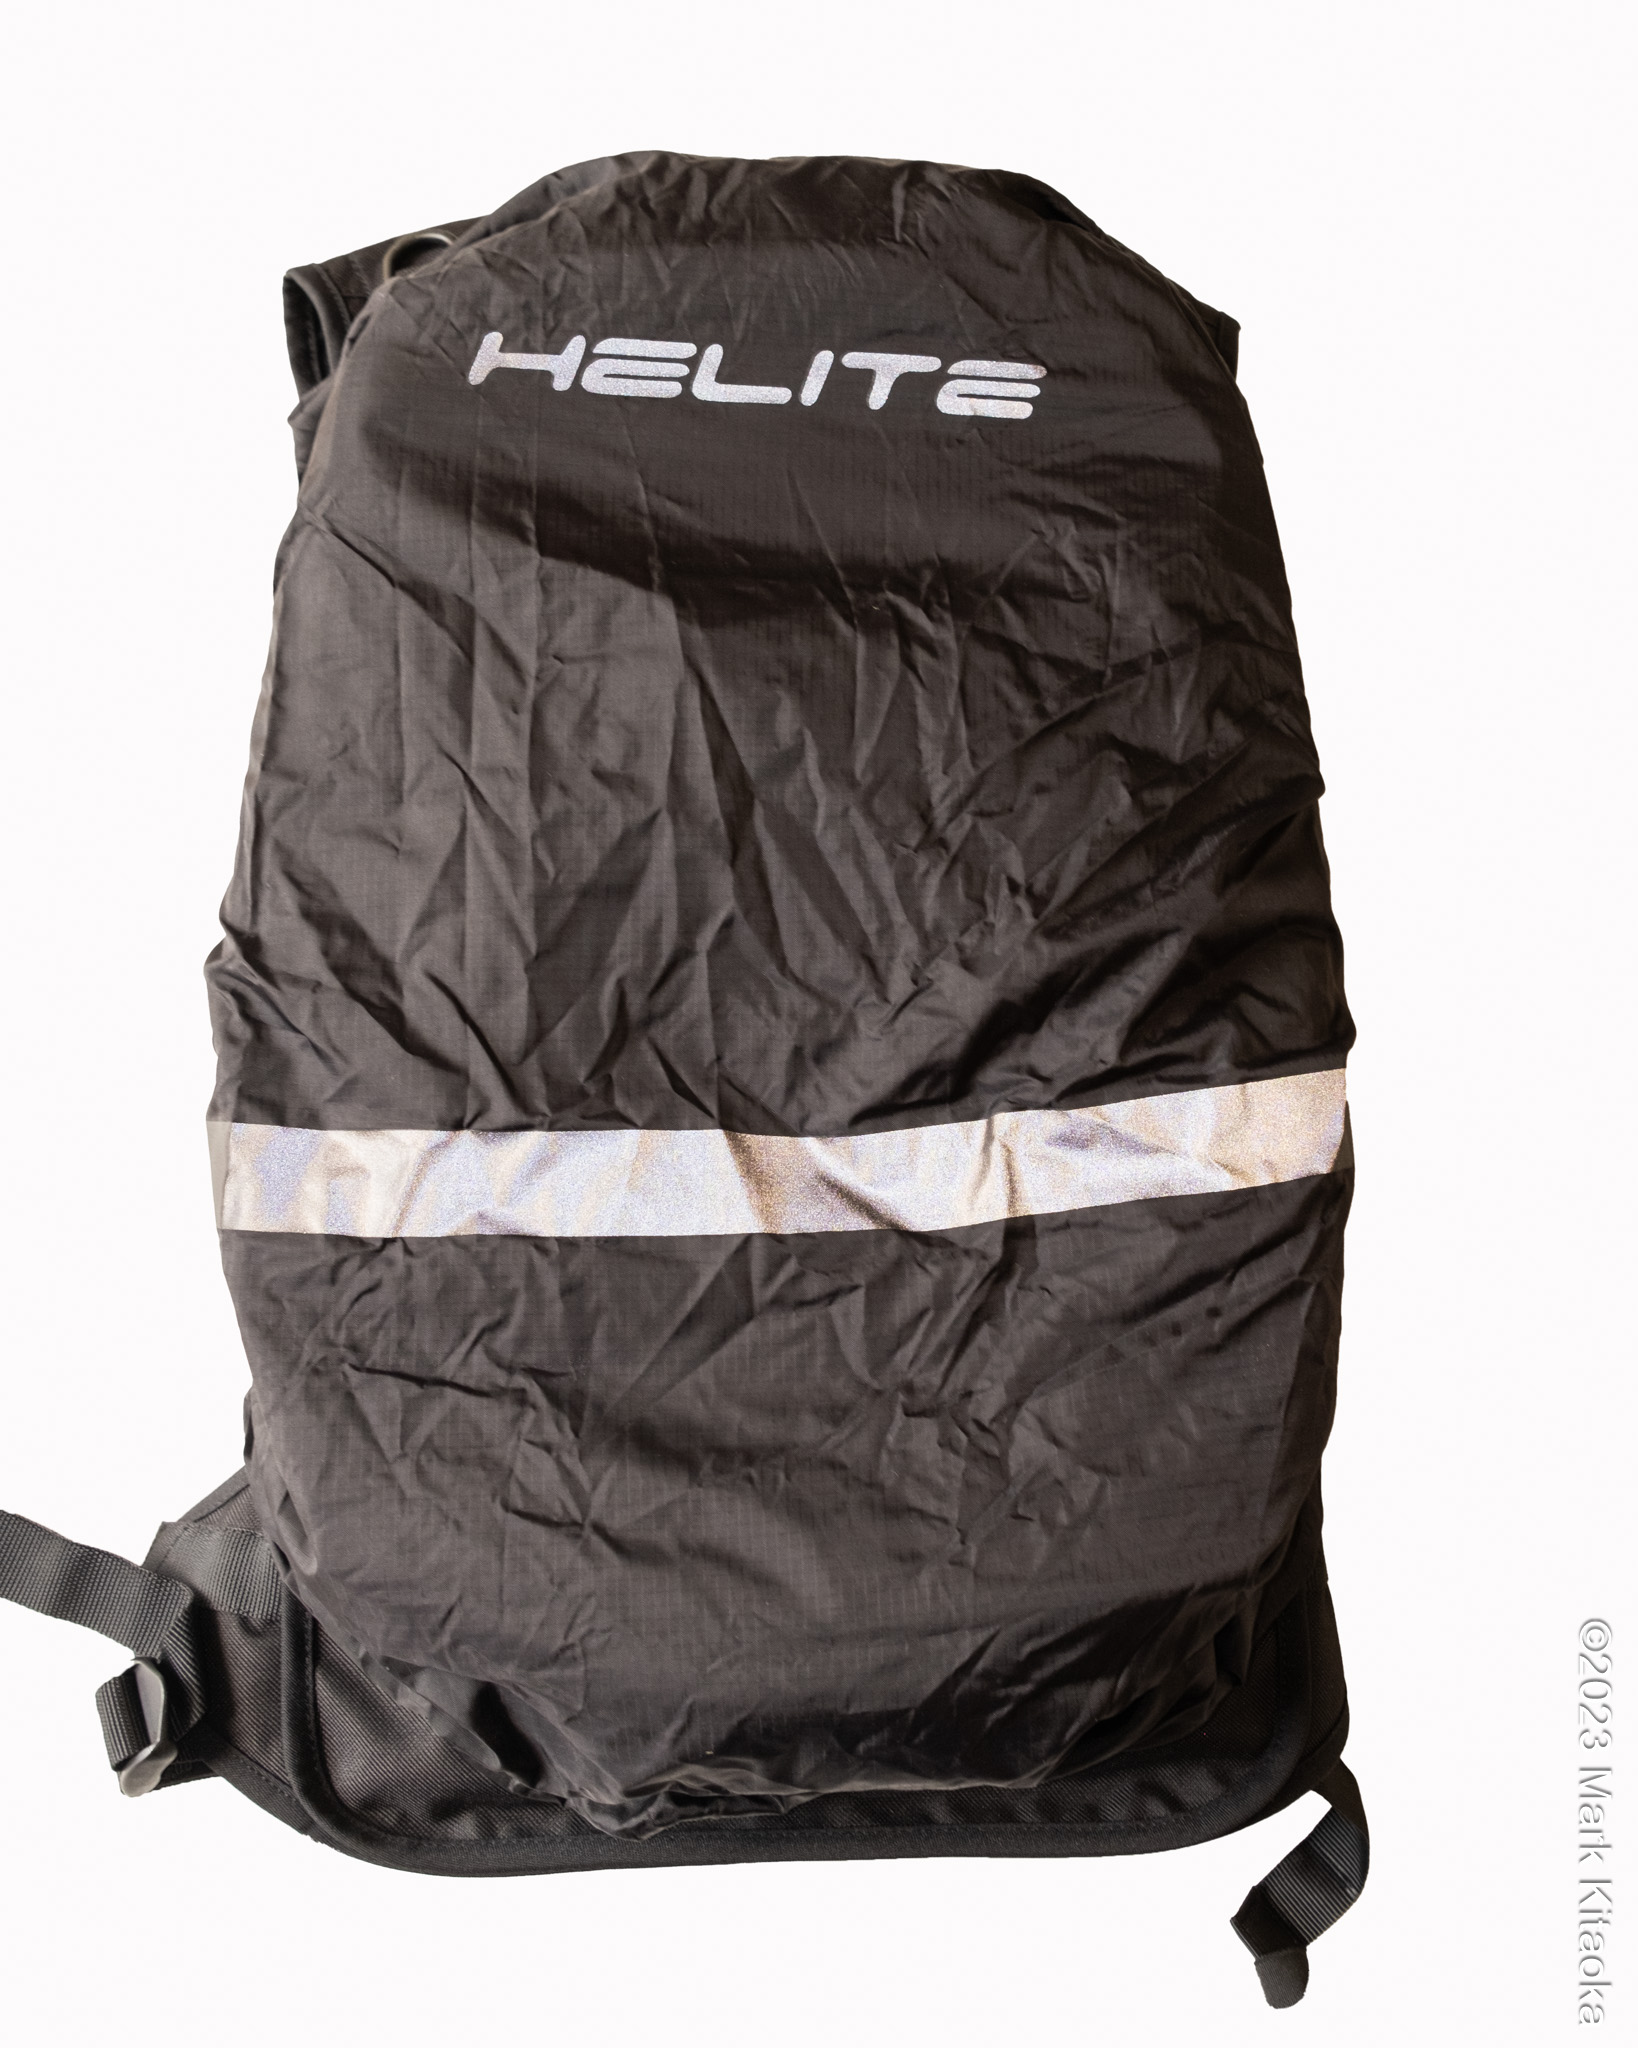 Helite rain cover for the airbag backpack